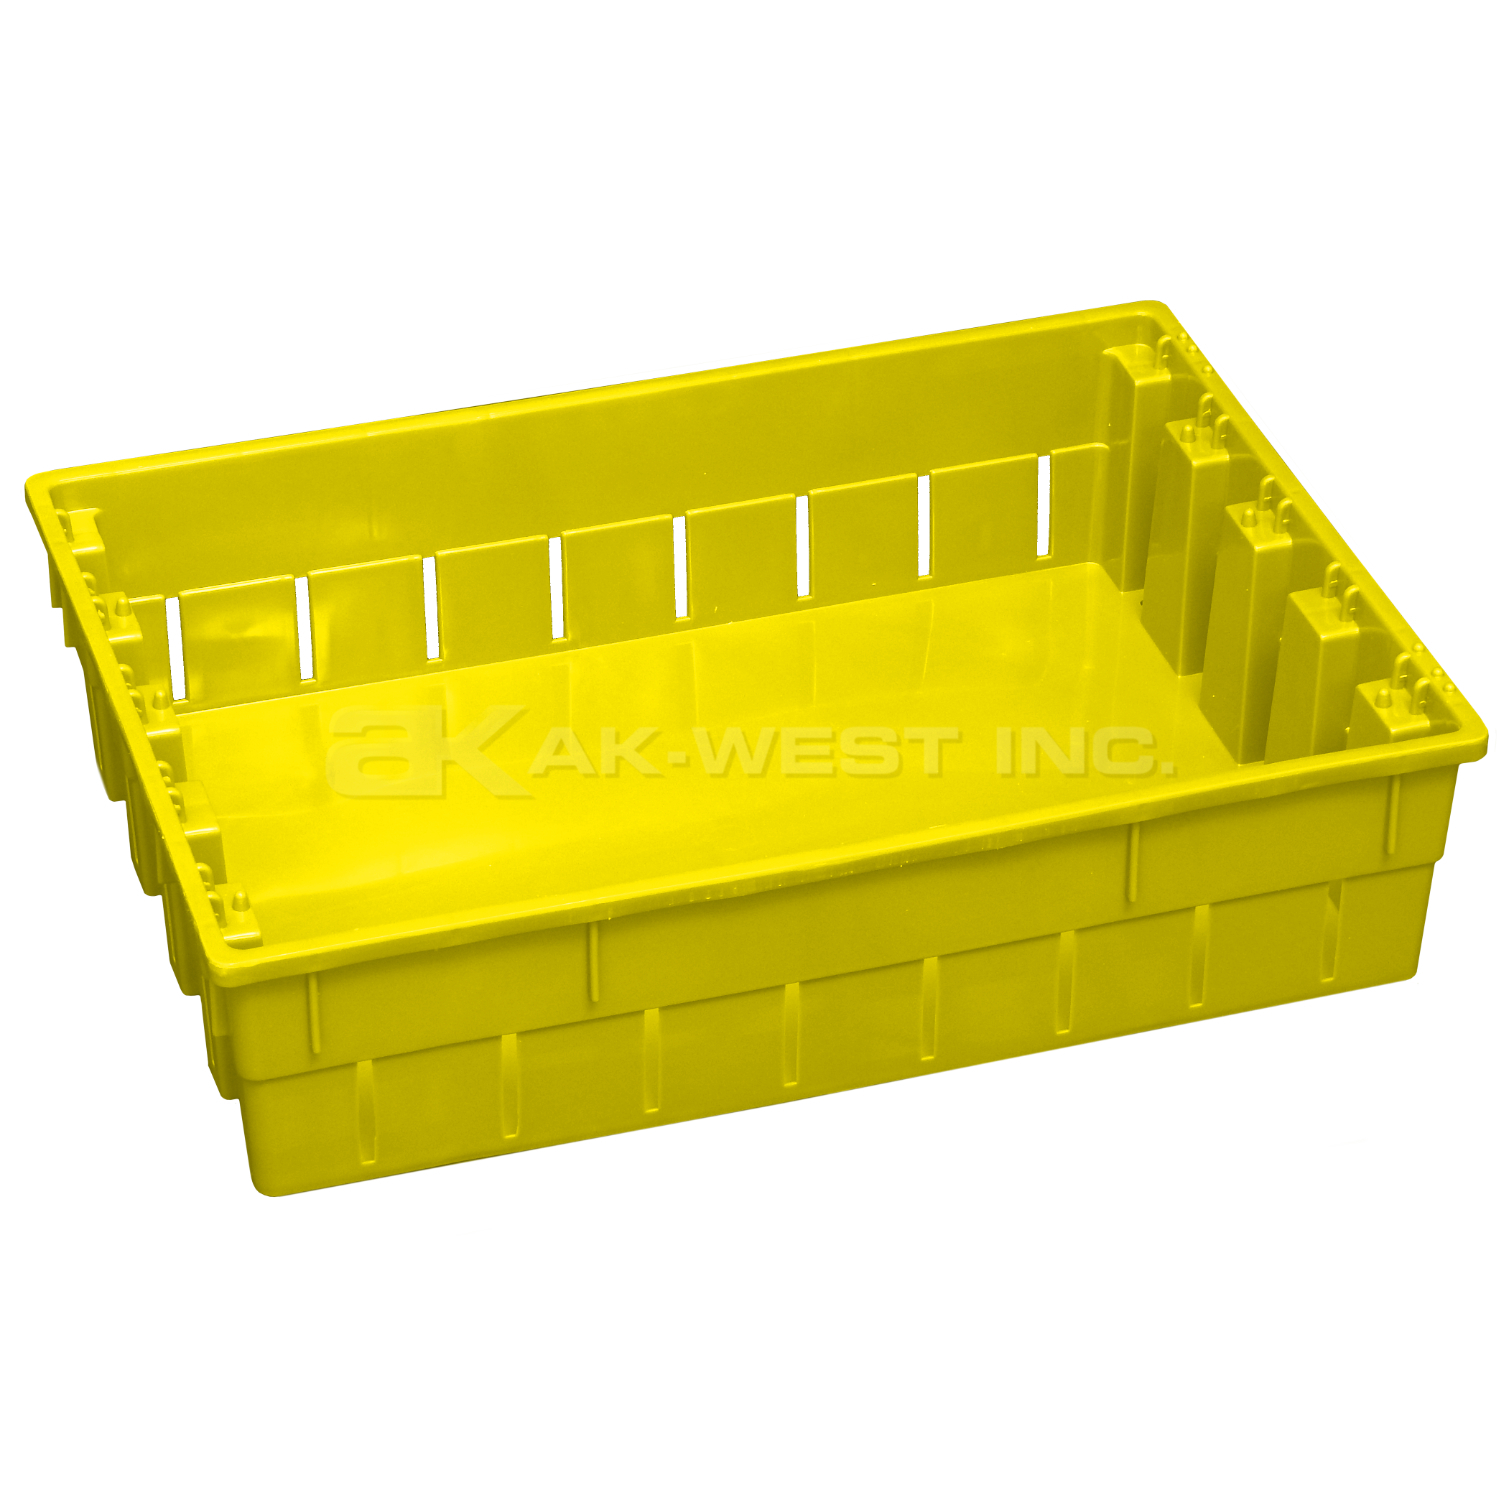 Yellow, 19"L x 13"W x 5"H Stack and Nest Container w/ Vented Sides and Solid Base